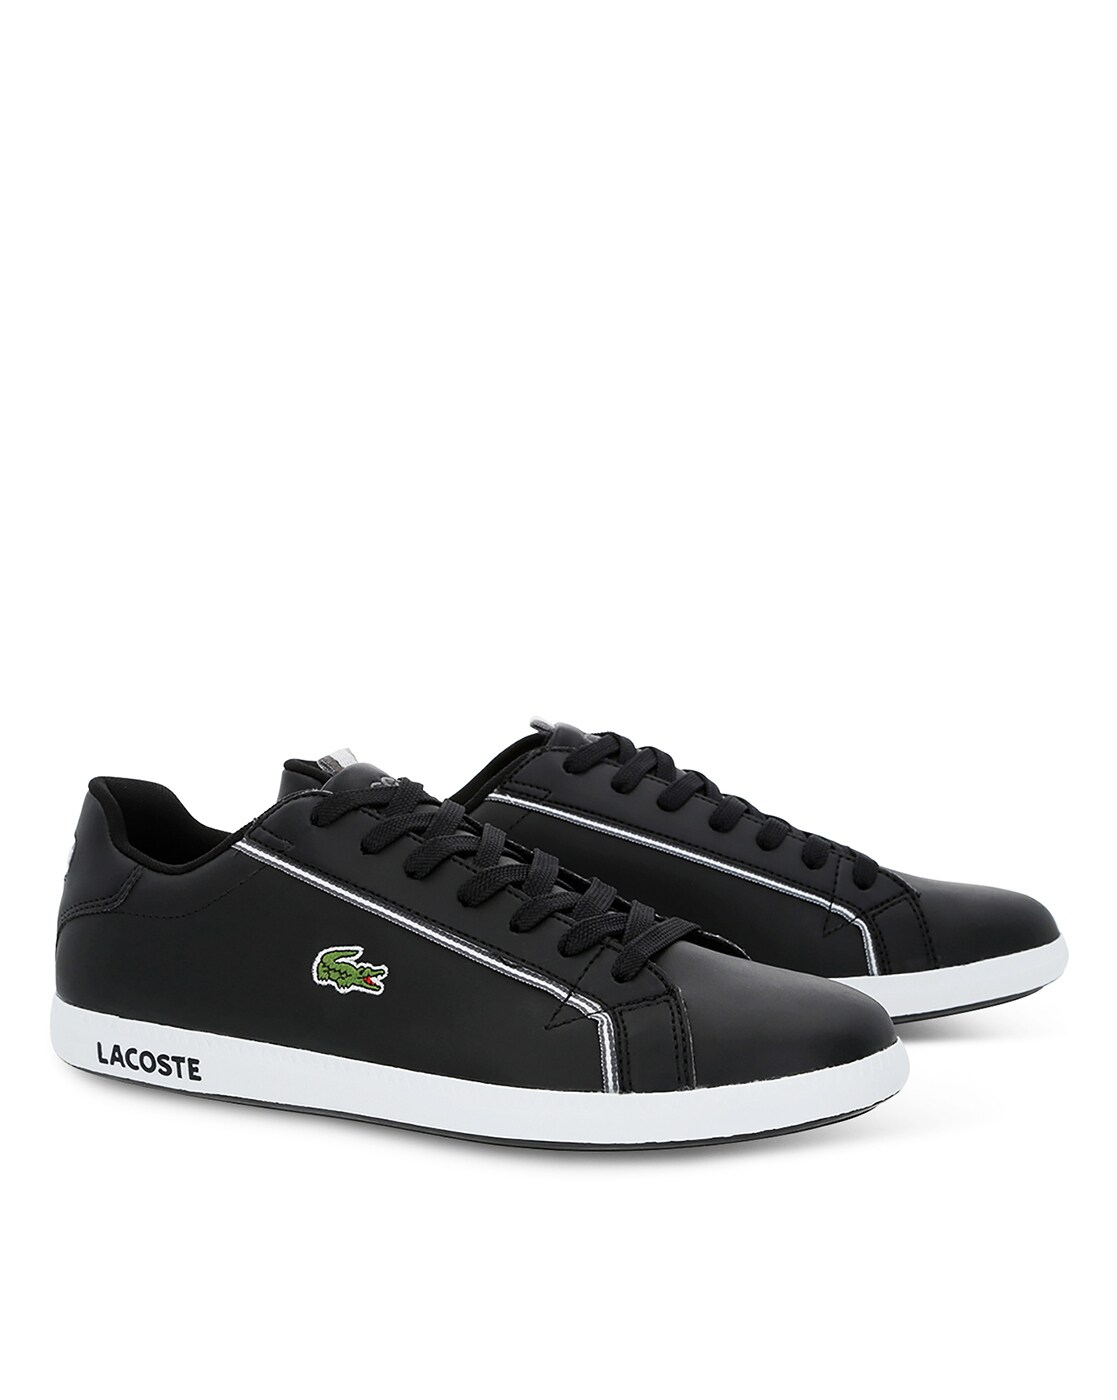 Buy Lacoste Shoes Online In India India